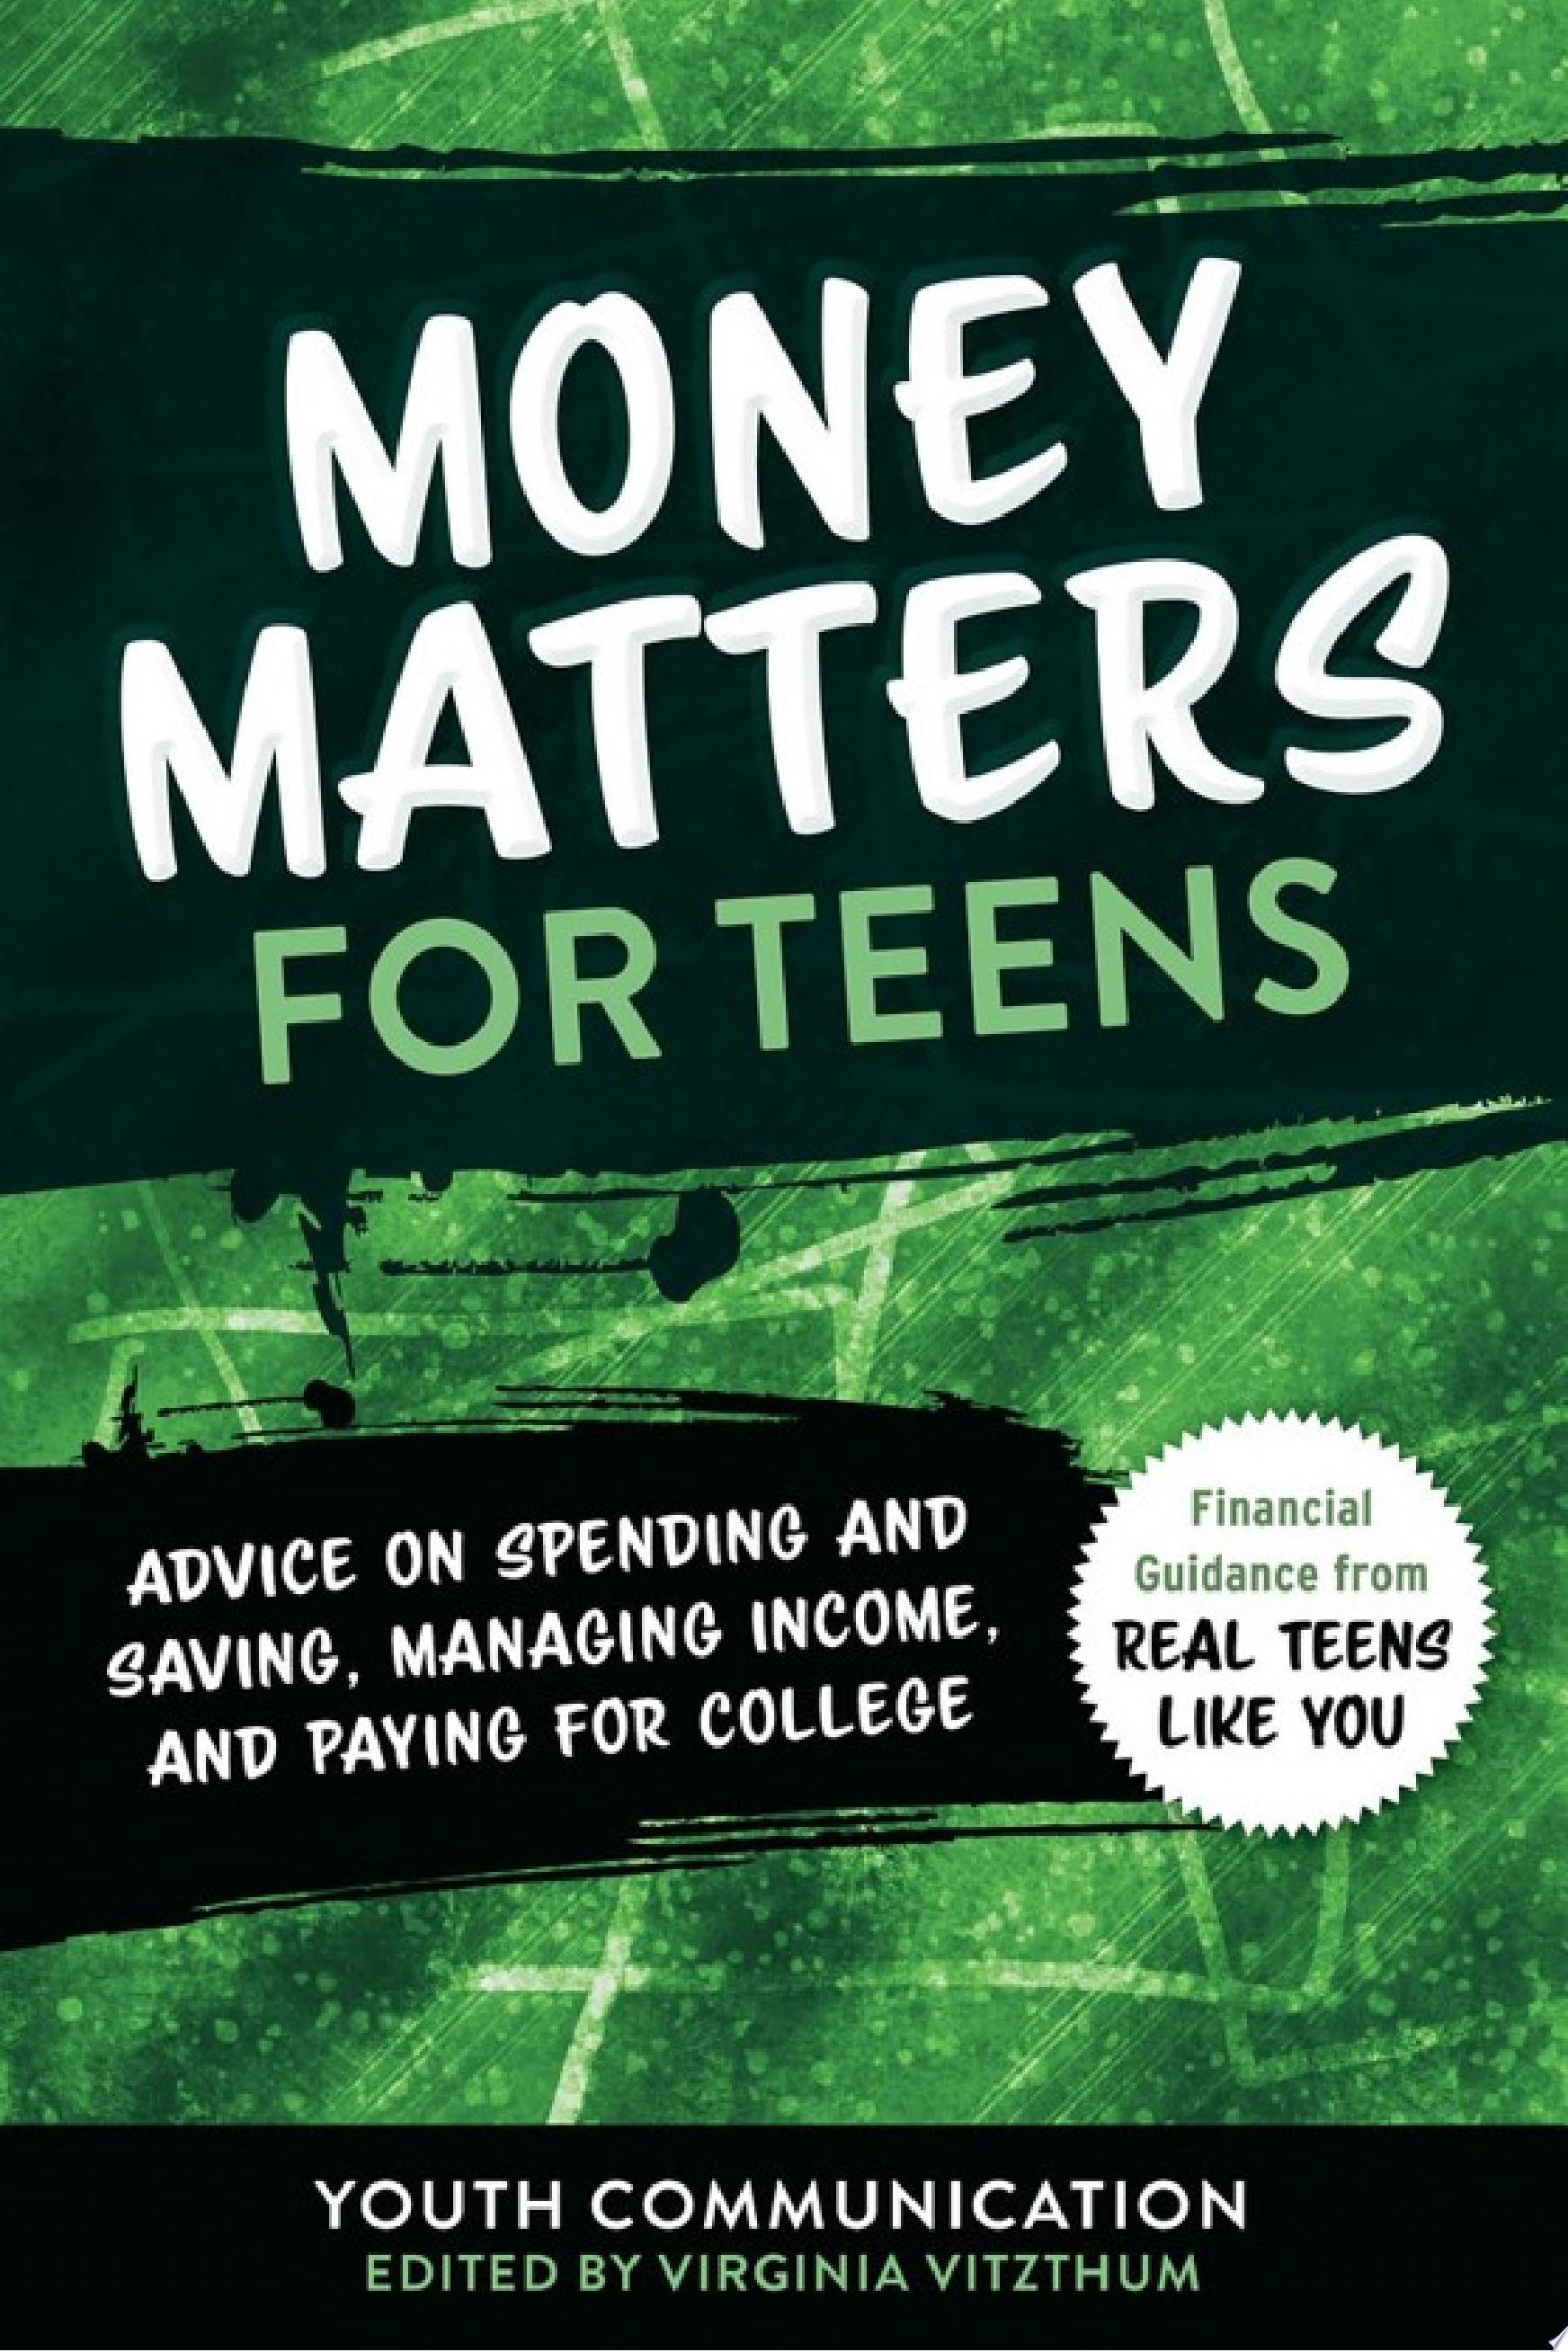 Image for "Money Matters for Teens"